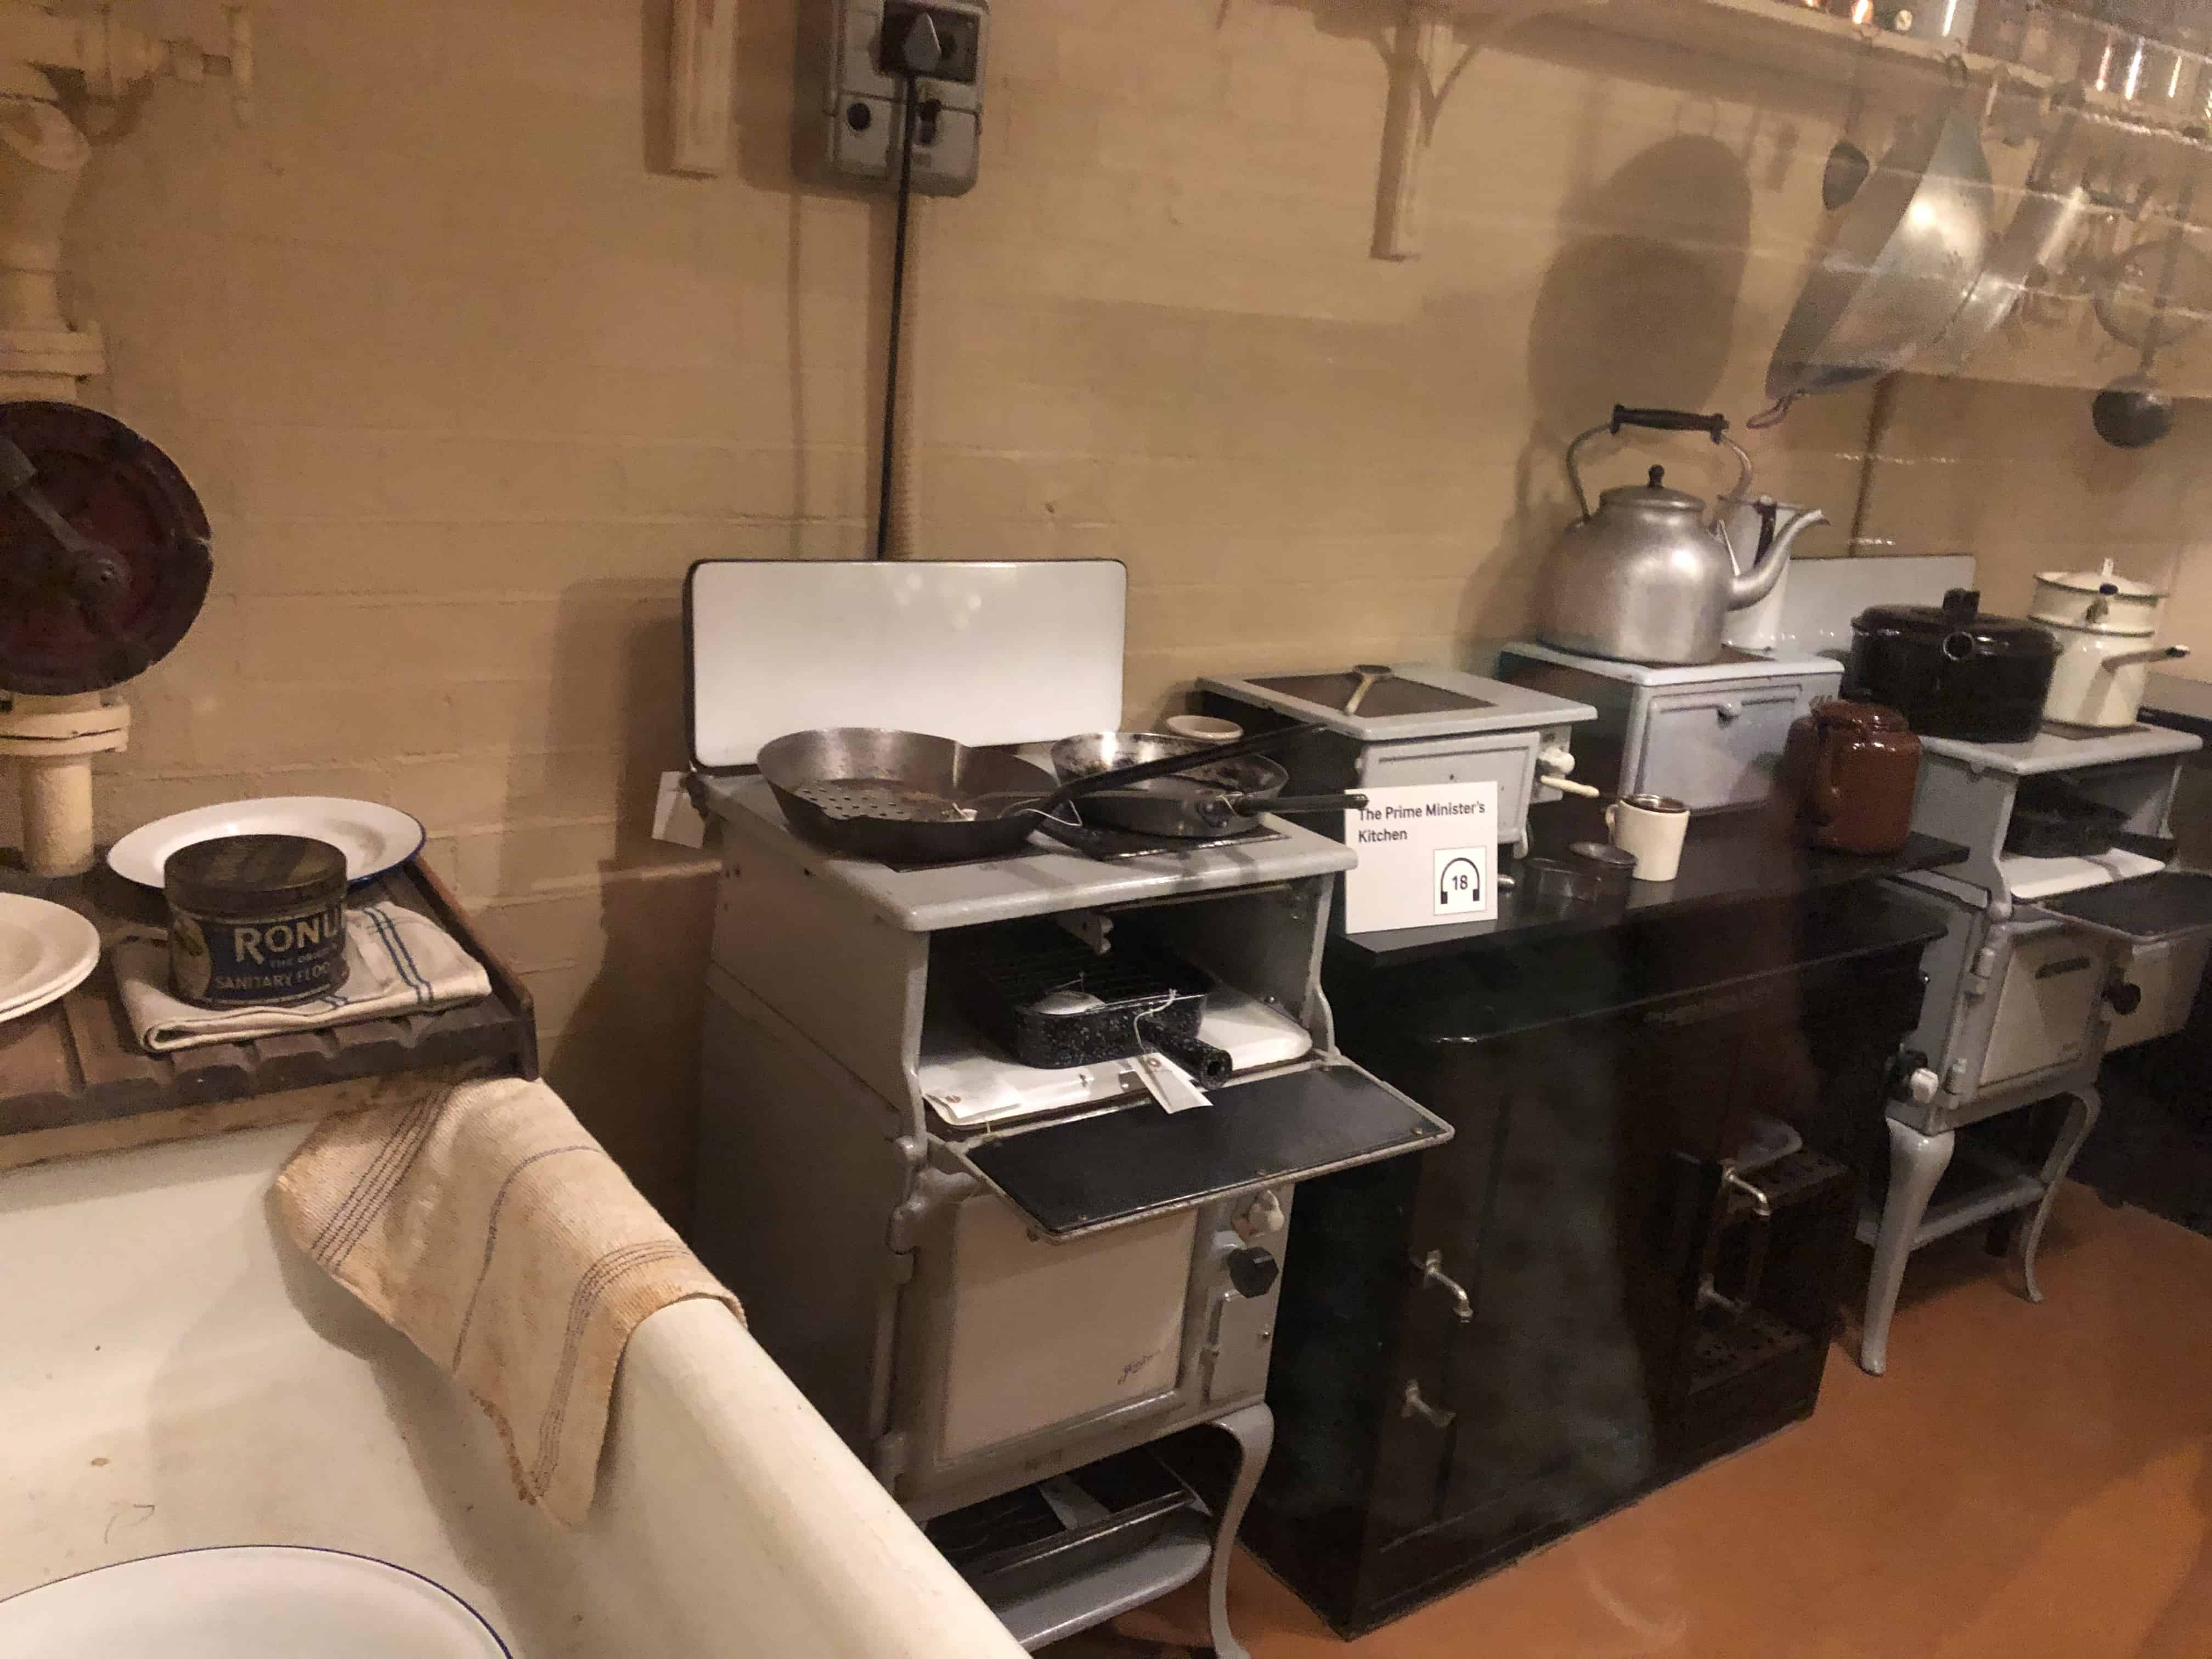 Prime Minister's Kitchen at the Churchill War Rooms in London, England